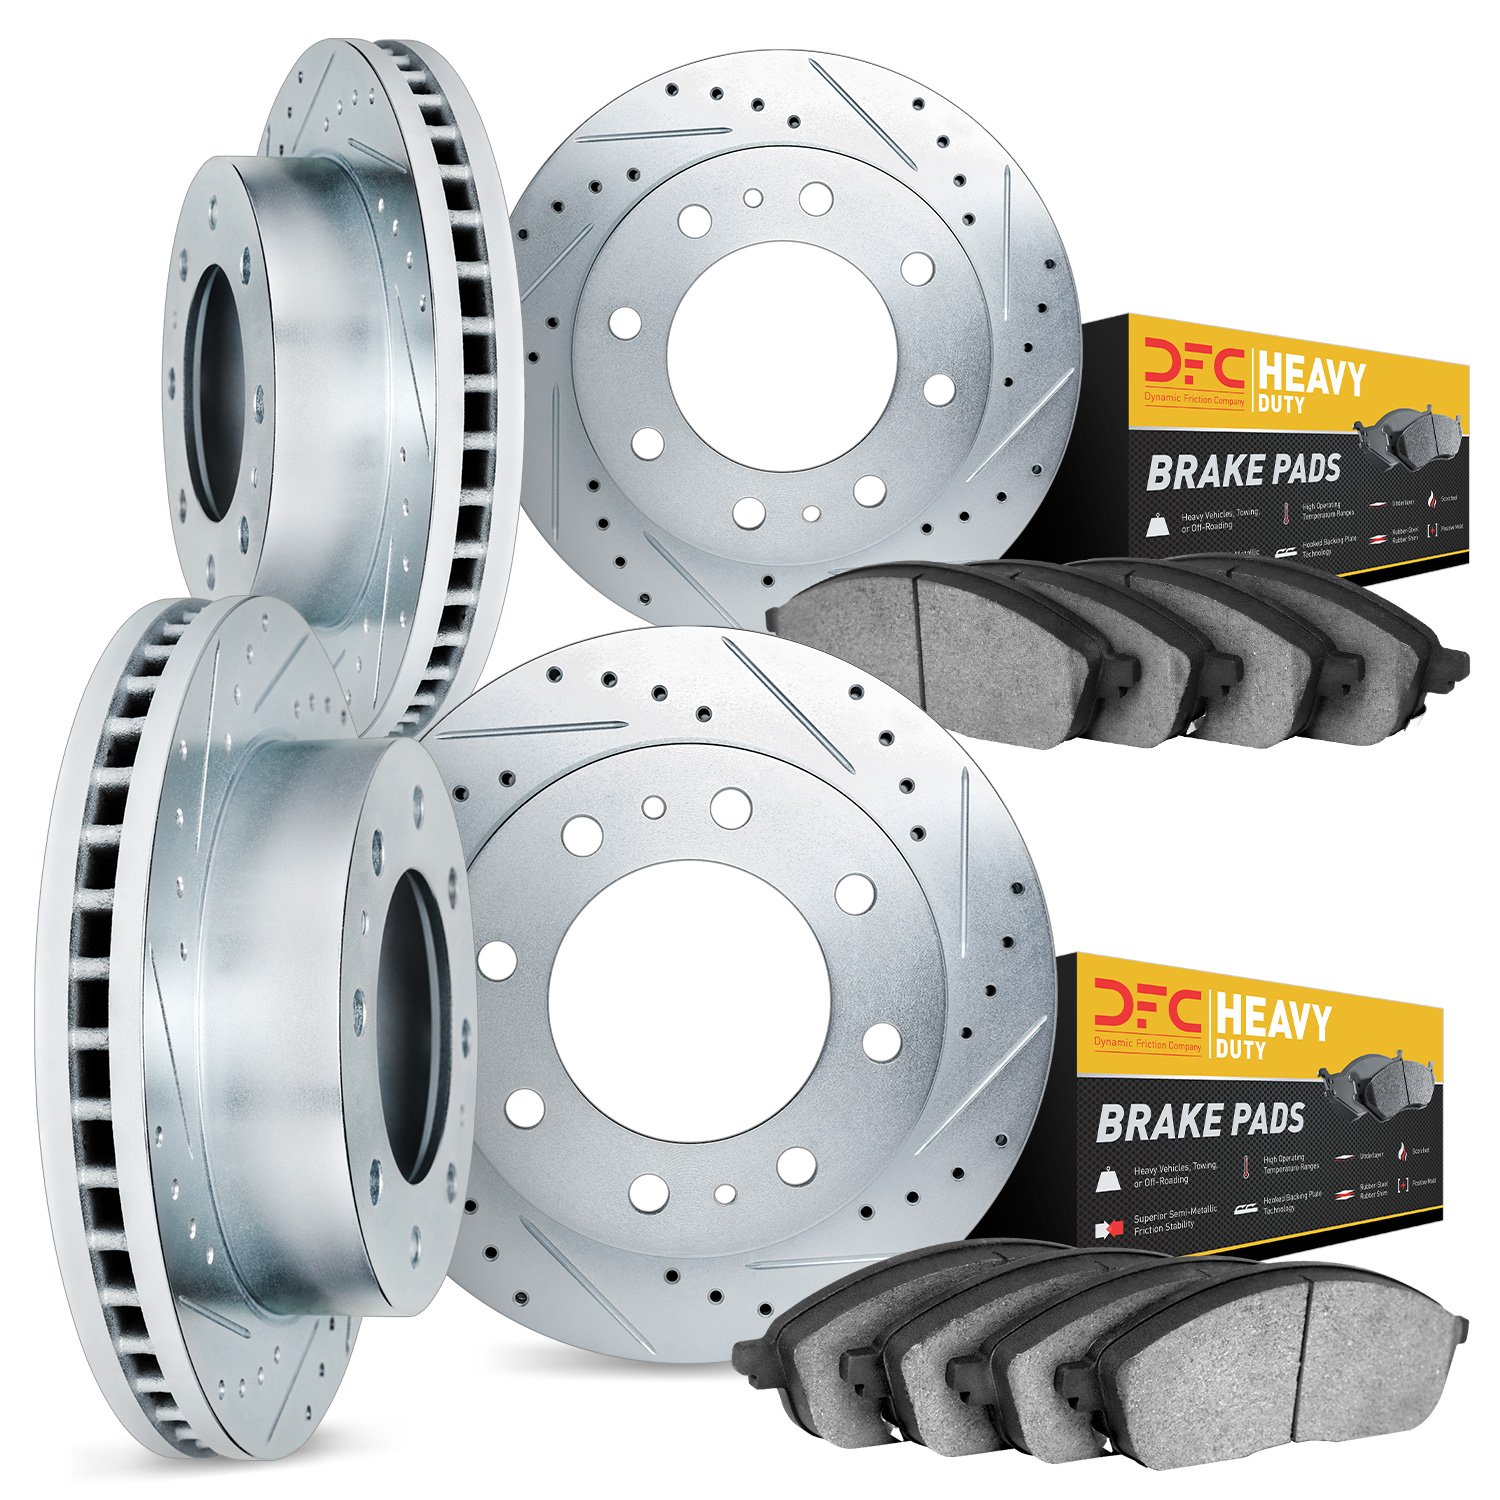 7204-46013 Drilled/Slotted Rotors w/Heavy-Duty Brake Pads Kit [Silver], 2000-2005 GM, Position: Front and Rear